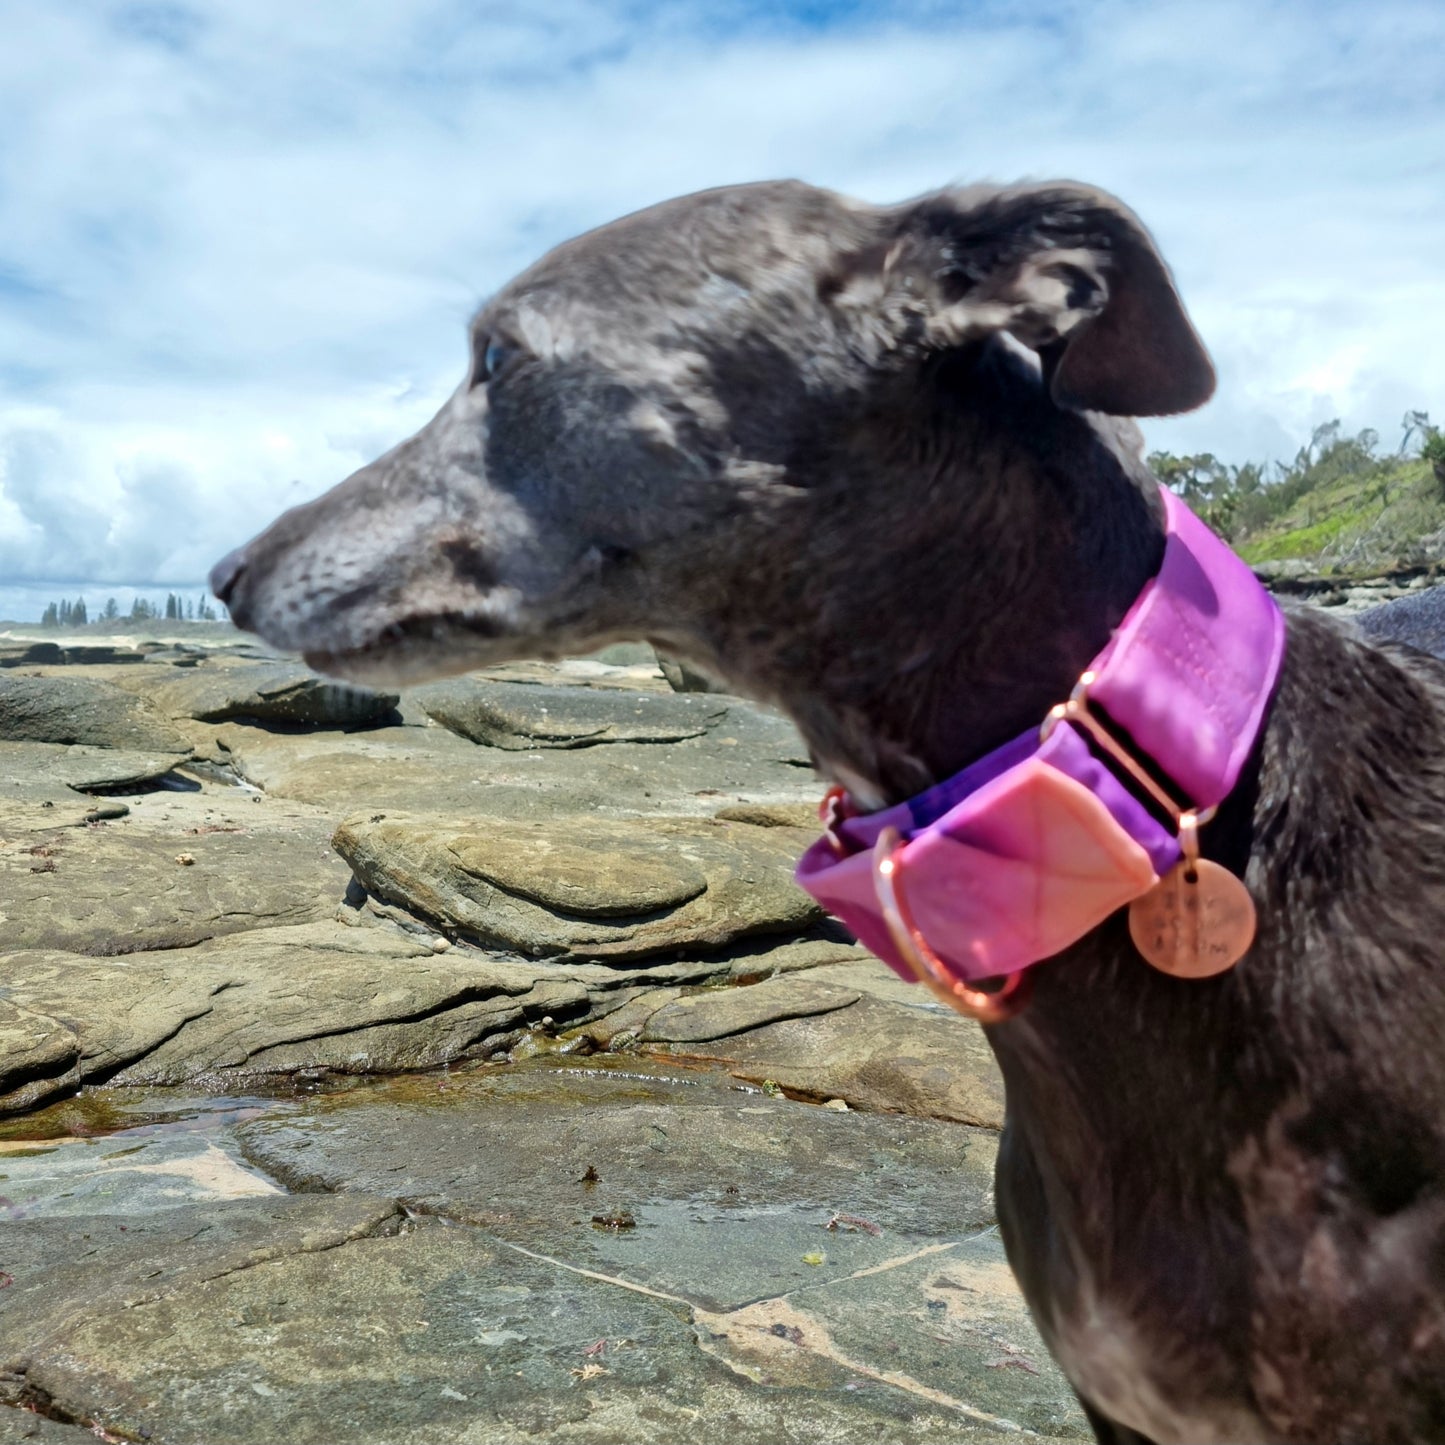 Pink watercolour martingale collar - Water resistant